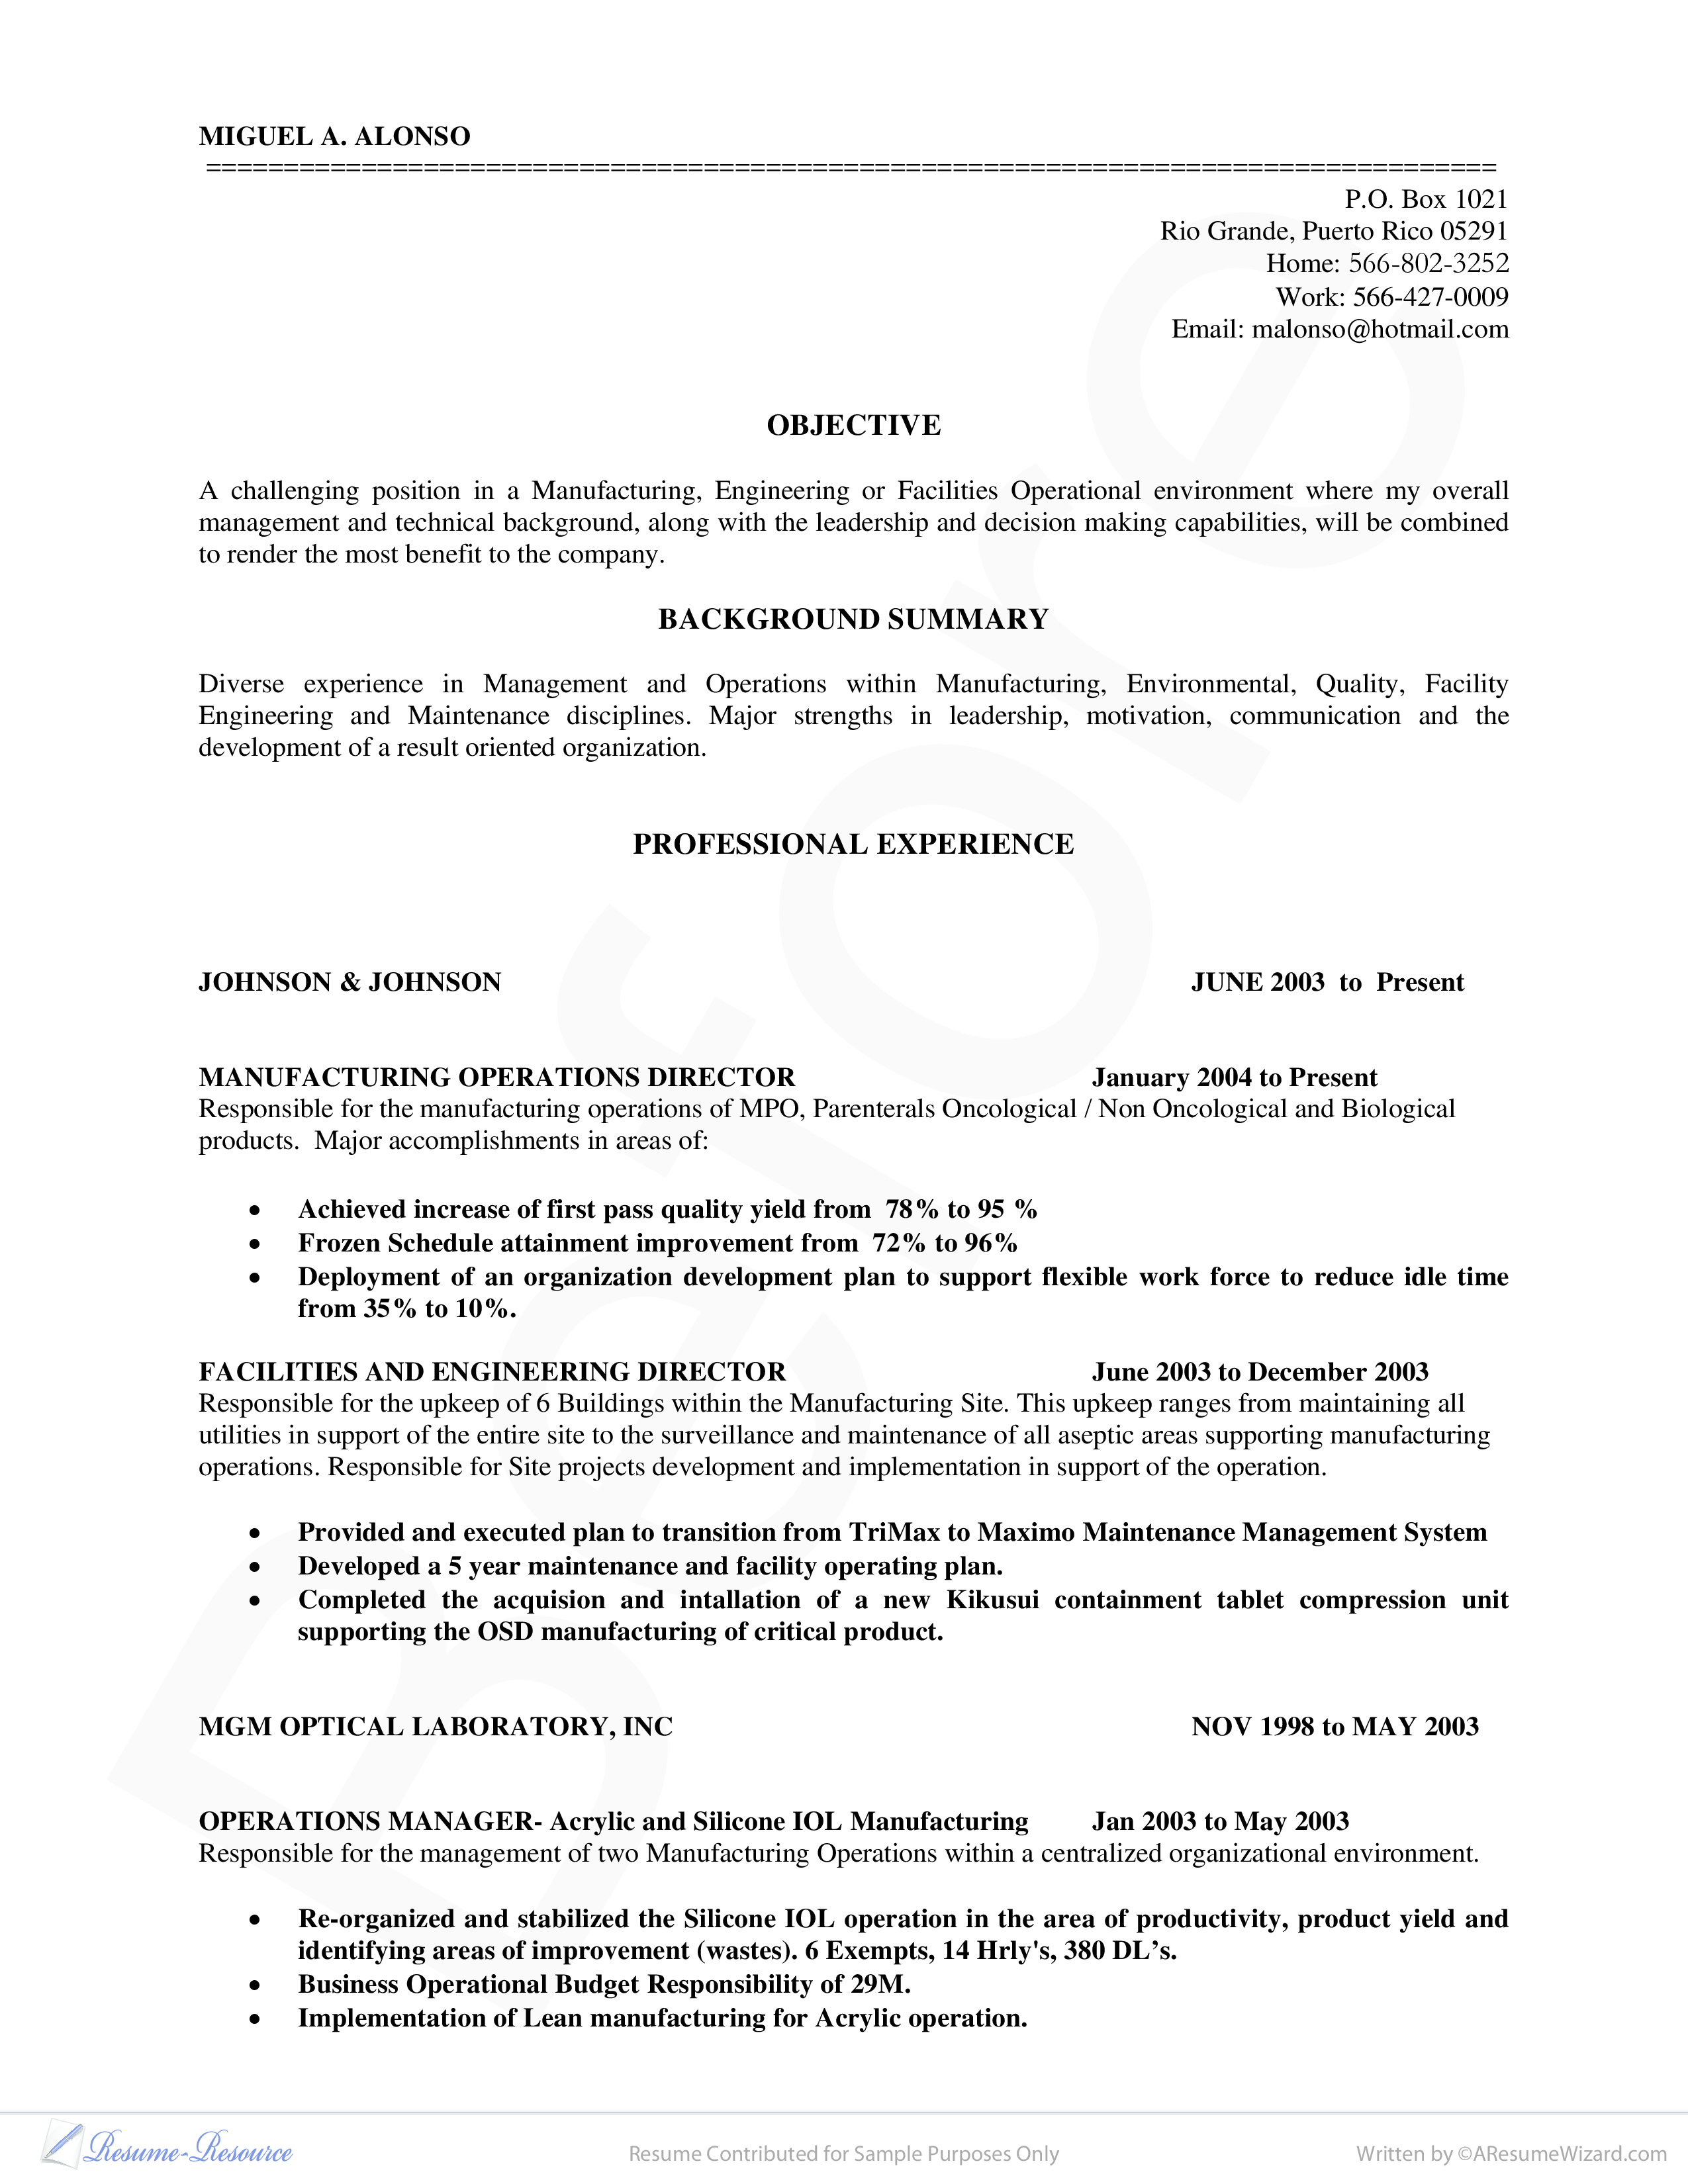 Manufacturing Manager Resume - Before And After main image